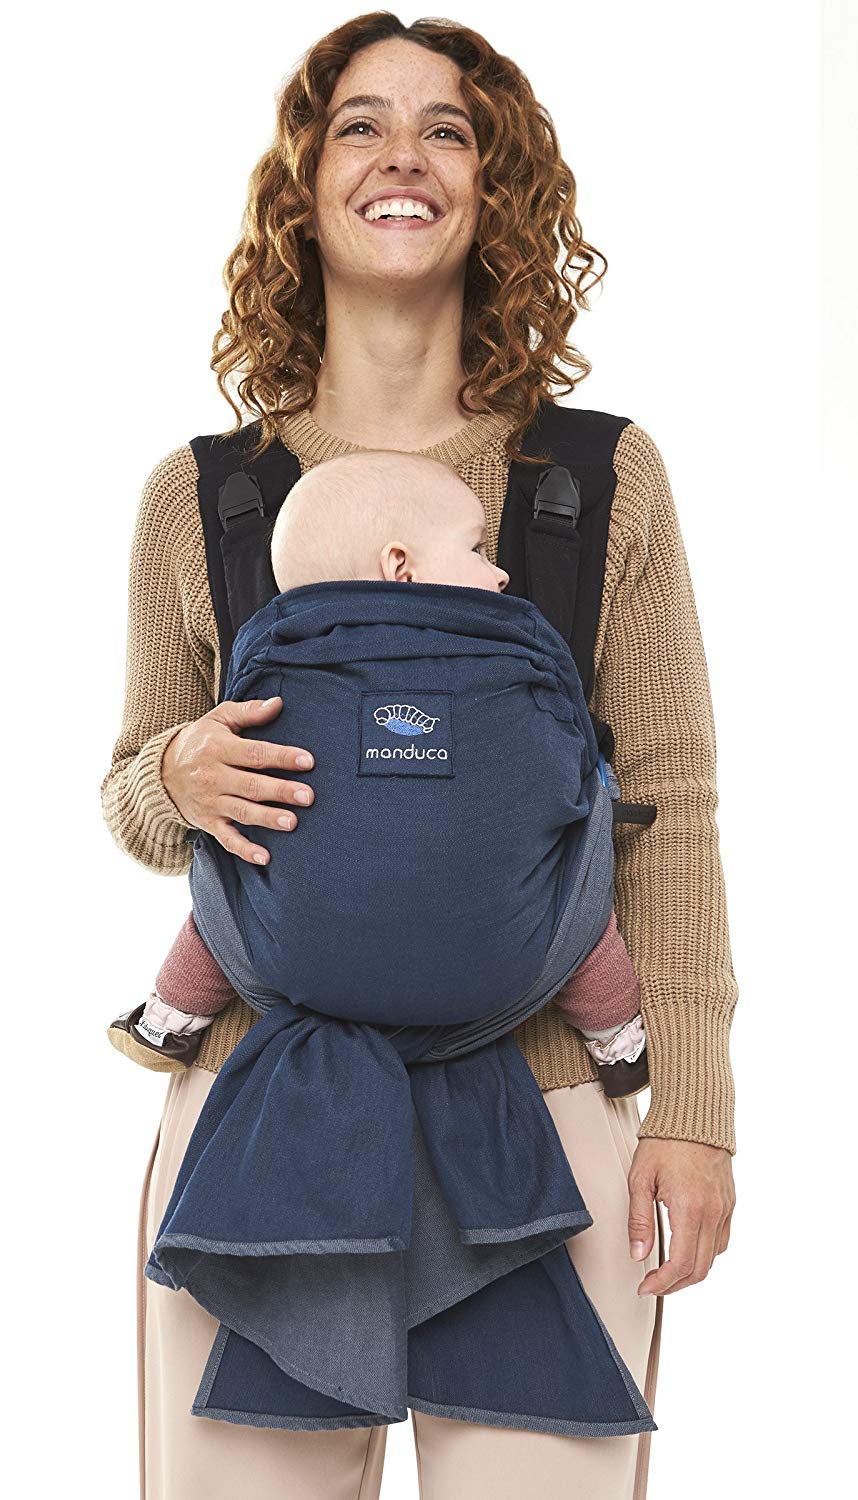 manduca DUO - Baby Carrier and Sling at the same time, Innovative Click & Tie System, Optimised as a Belly Carrier, Simple, Safe, Easy to Put, Slip Protection for Baby (Blue/Blue)